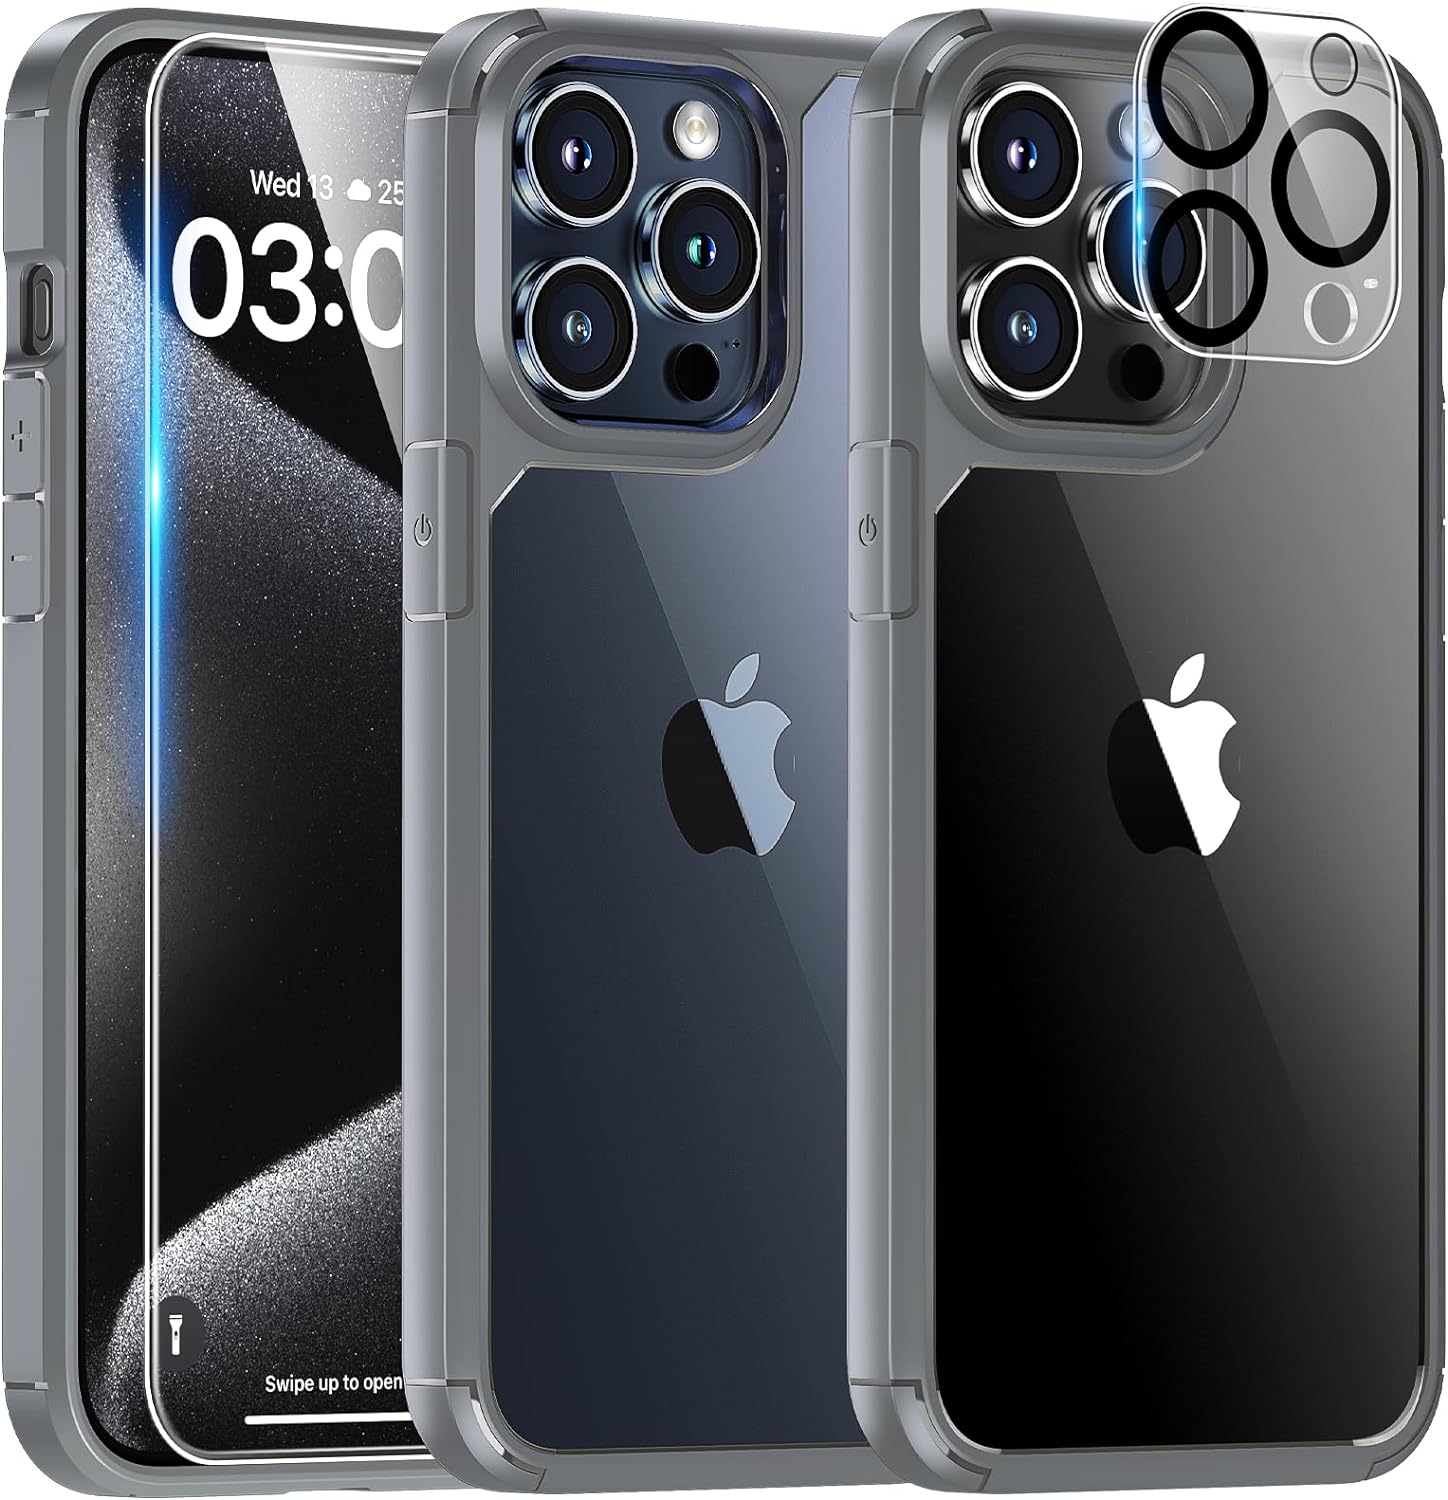 TAURI for iPhone 15 Pro Max Case, [5 in 1] 1X Clear Case [Not-Yellowing] with 2X Tempered Glass Screen Protector + 2X Camera Lens Protector, [Militarized Drop Defense] Slim Phone Case 6.7 inch, Gray